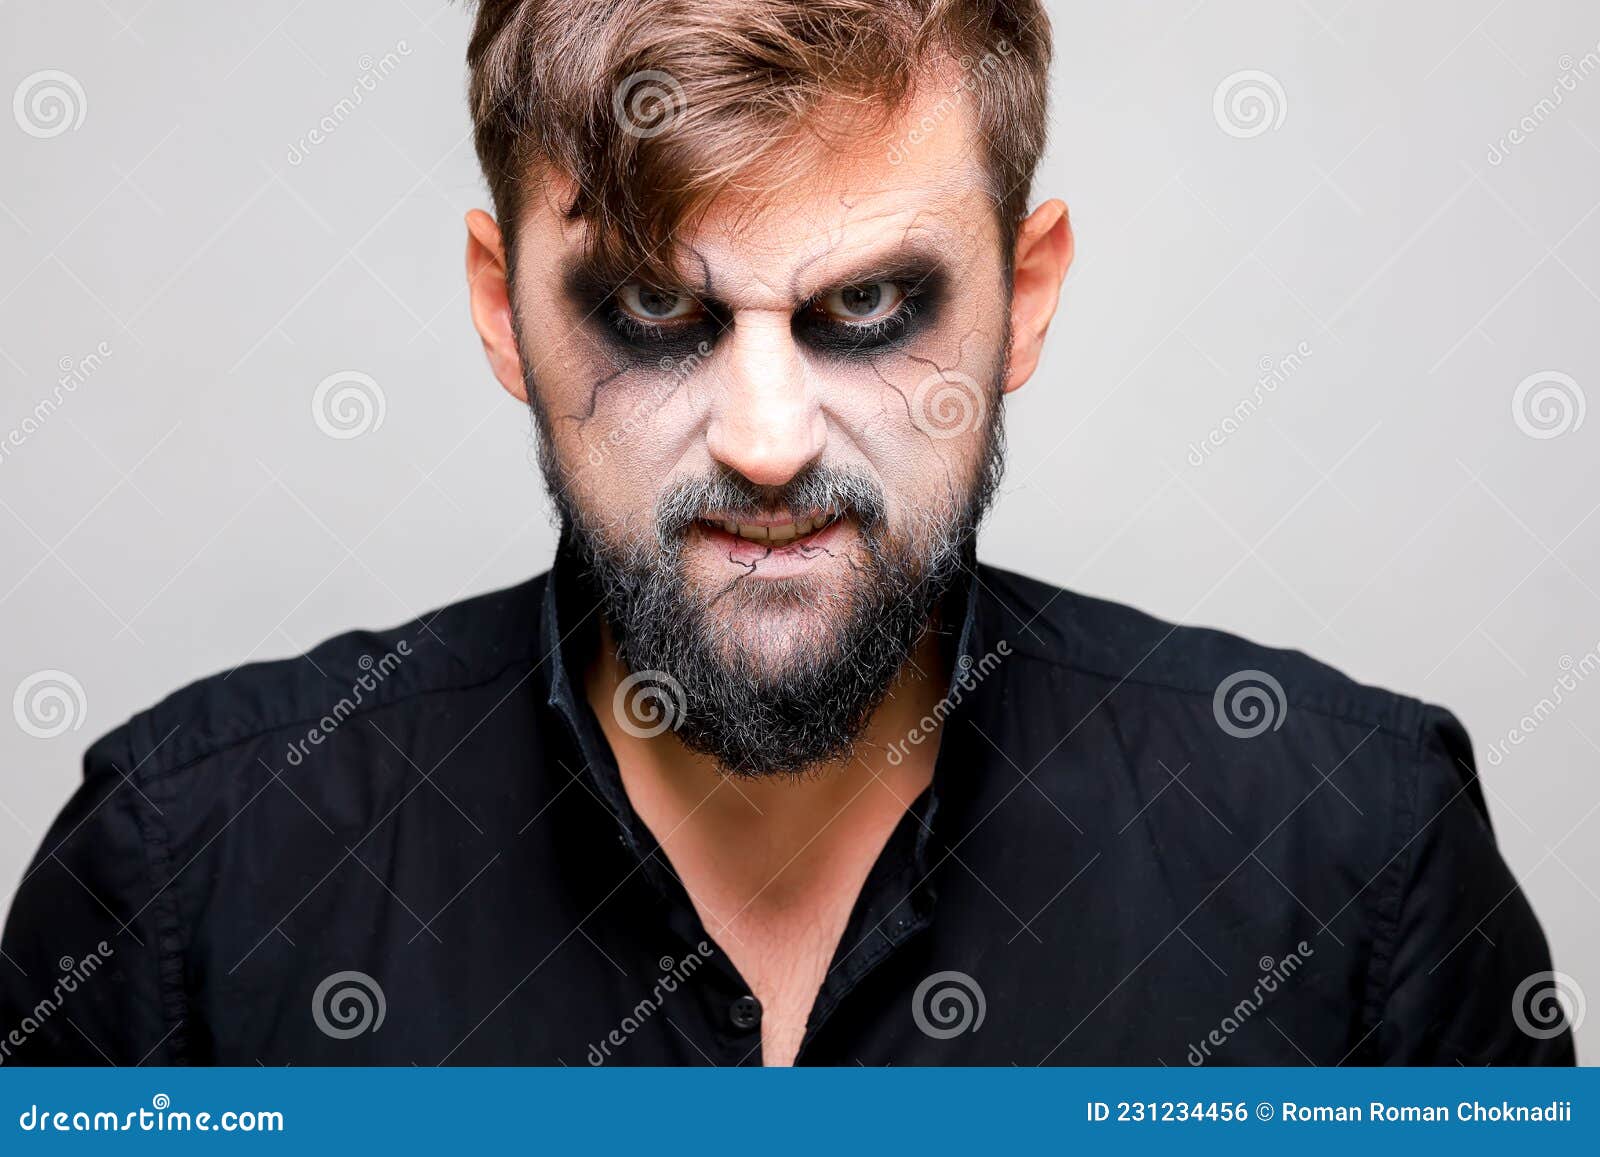 Portrait of a Man with a Beard with Makeup for Halloween in the Style of the Undead Stock Photo - halloween, costume: 231234456